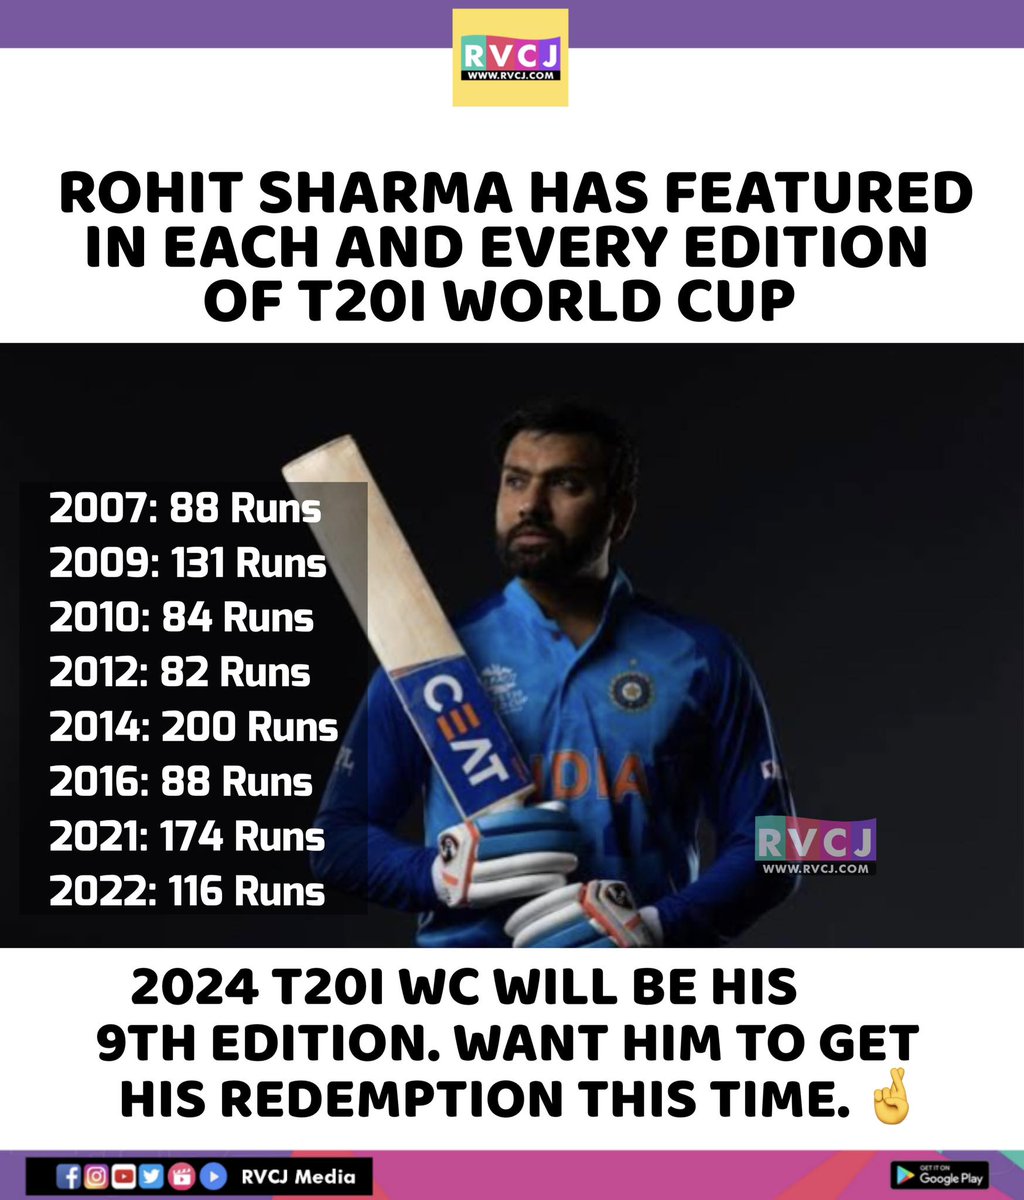 Rohit Sharma to get redemption in 2024 T20I World Cup 🤞🏻